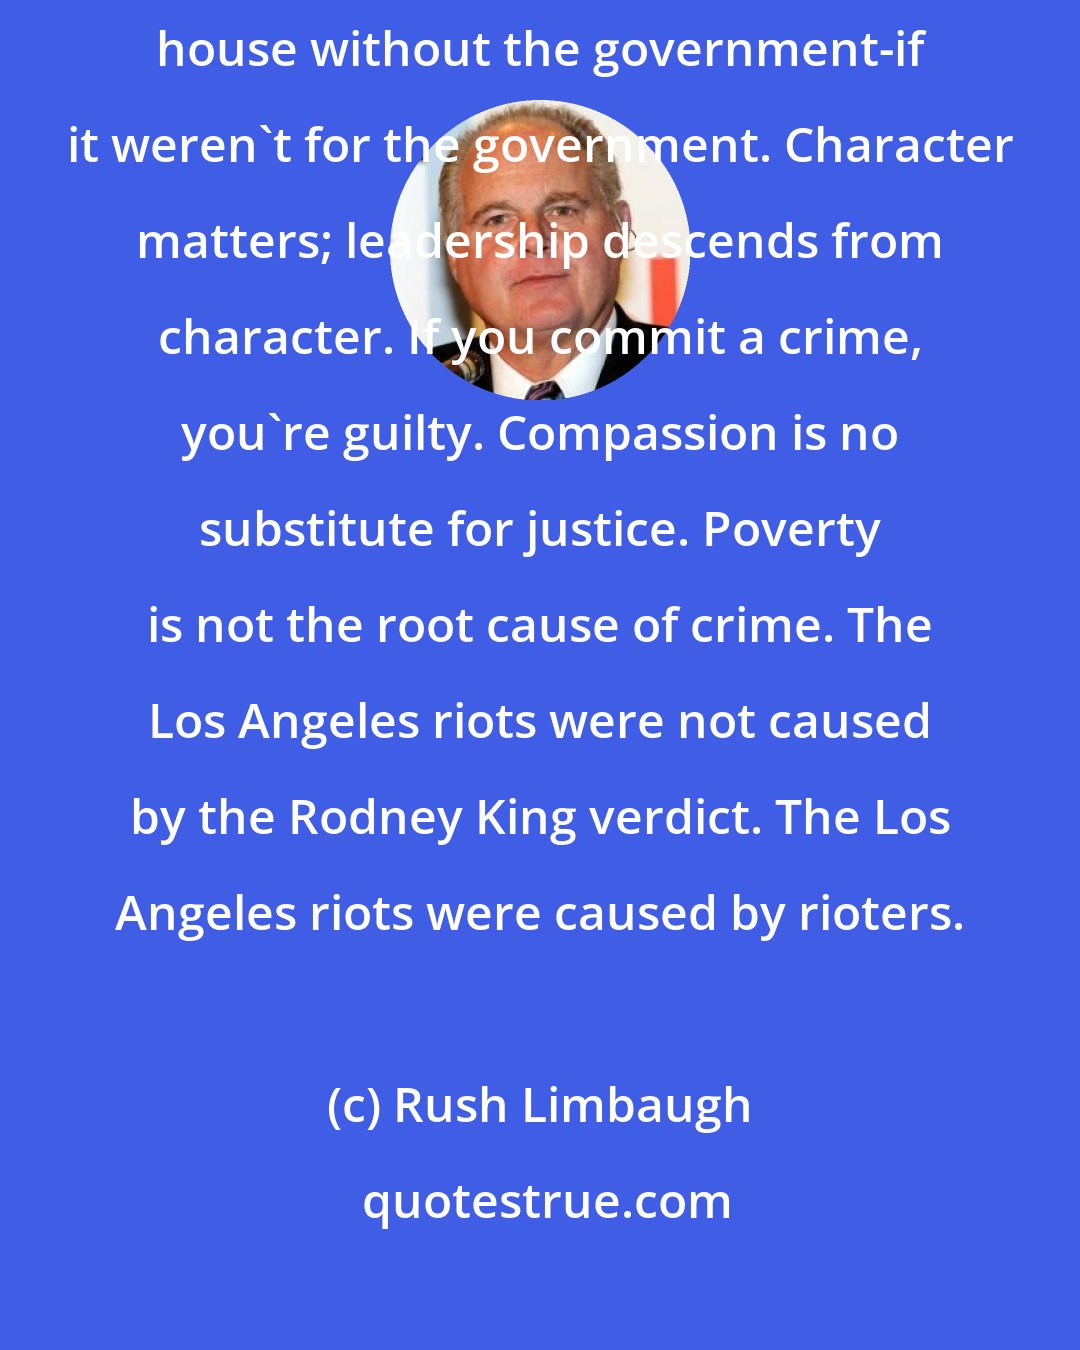 Rush Limbaugh: No nation ever taxed itself into prosperity. You could afford your house without the government-if it weren't for the government. Character matters; leadership descends from character. If you commit a crime, you're guilty. Compassion is no substitute for justice. Poverty is not the root cause of crime. The Los Angeles riots were not caused by the Rodney King verdict. The Los Angeles riots were caused by rioters.